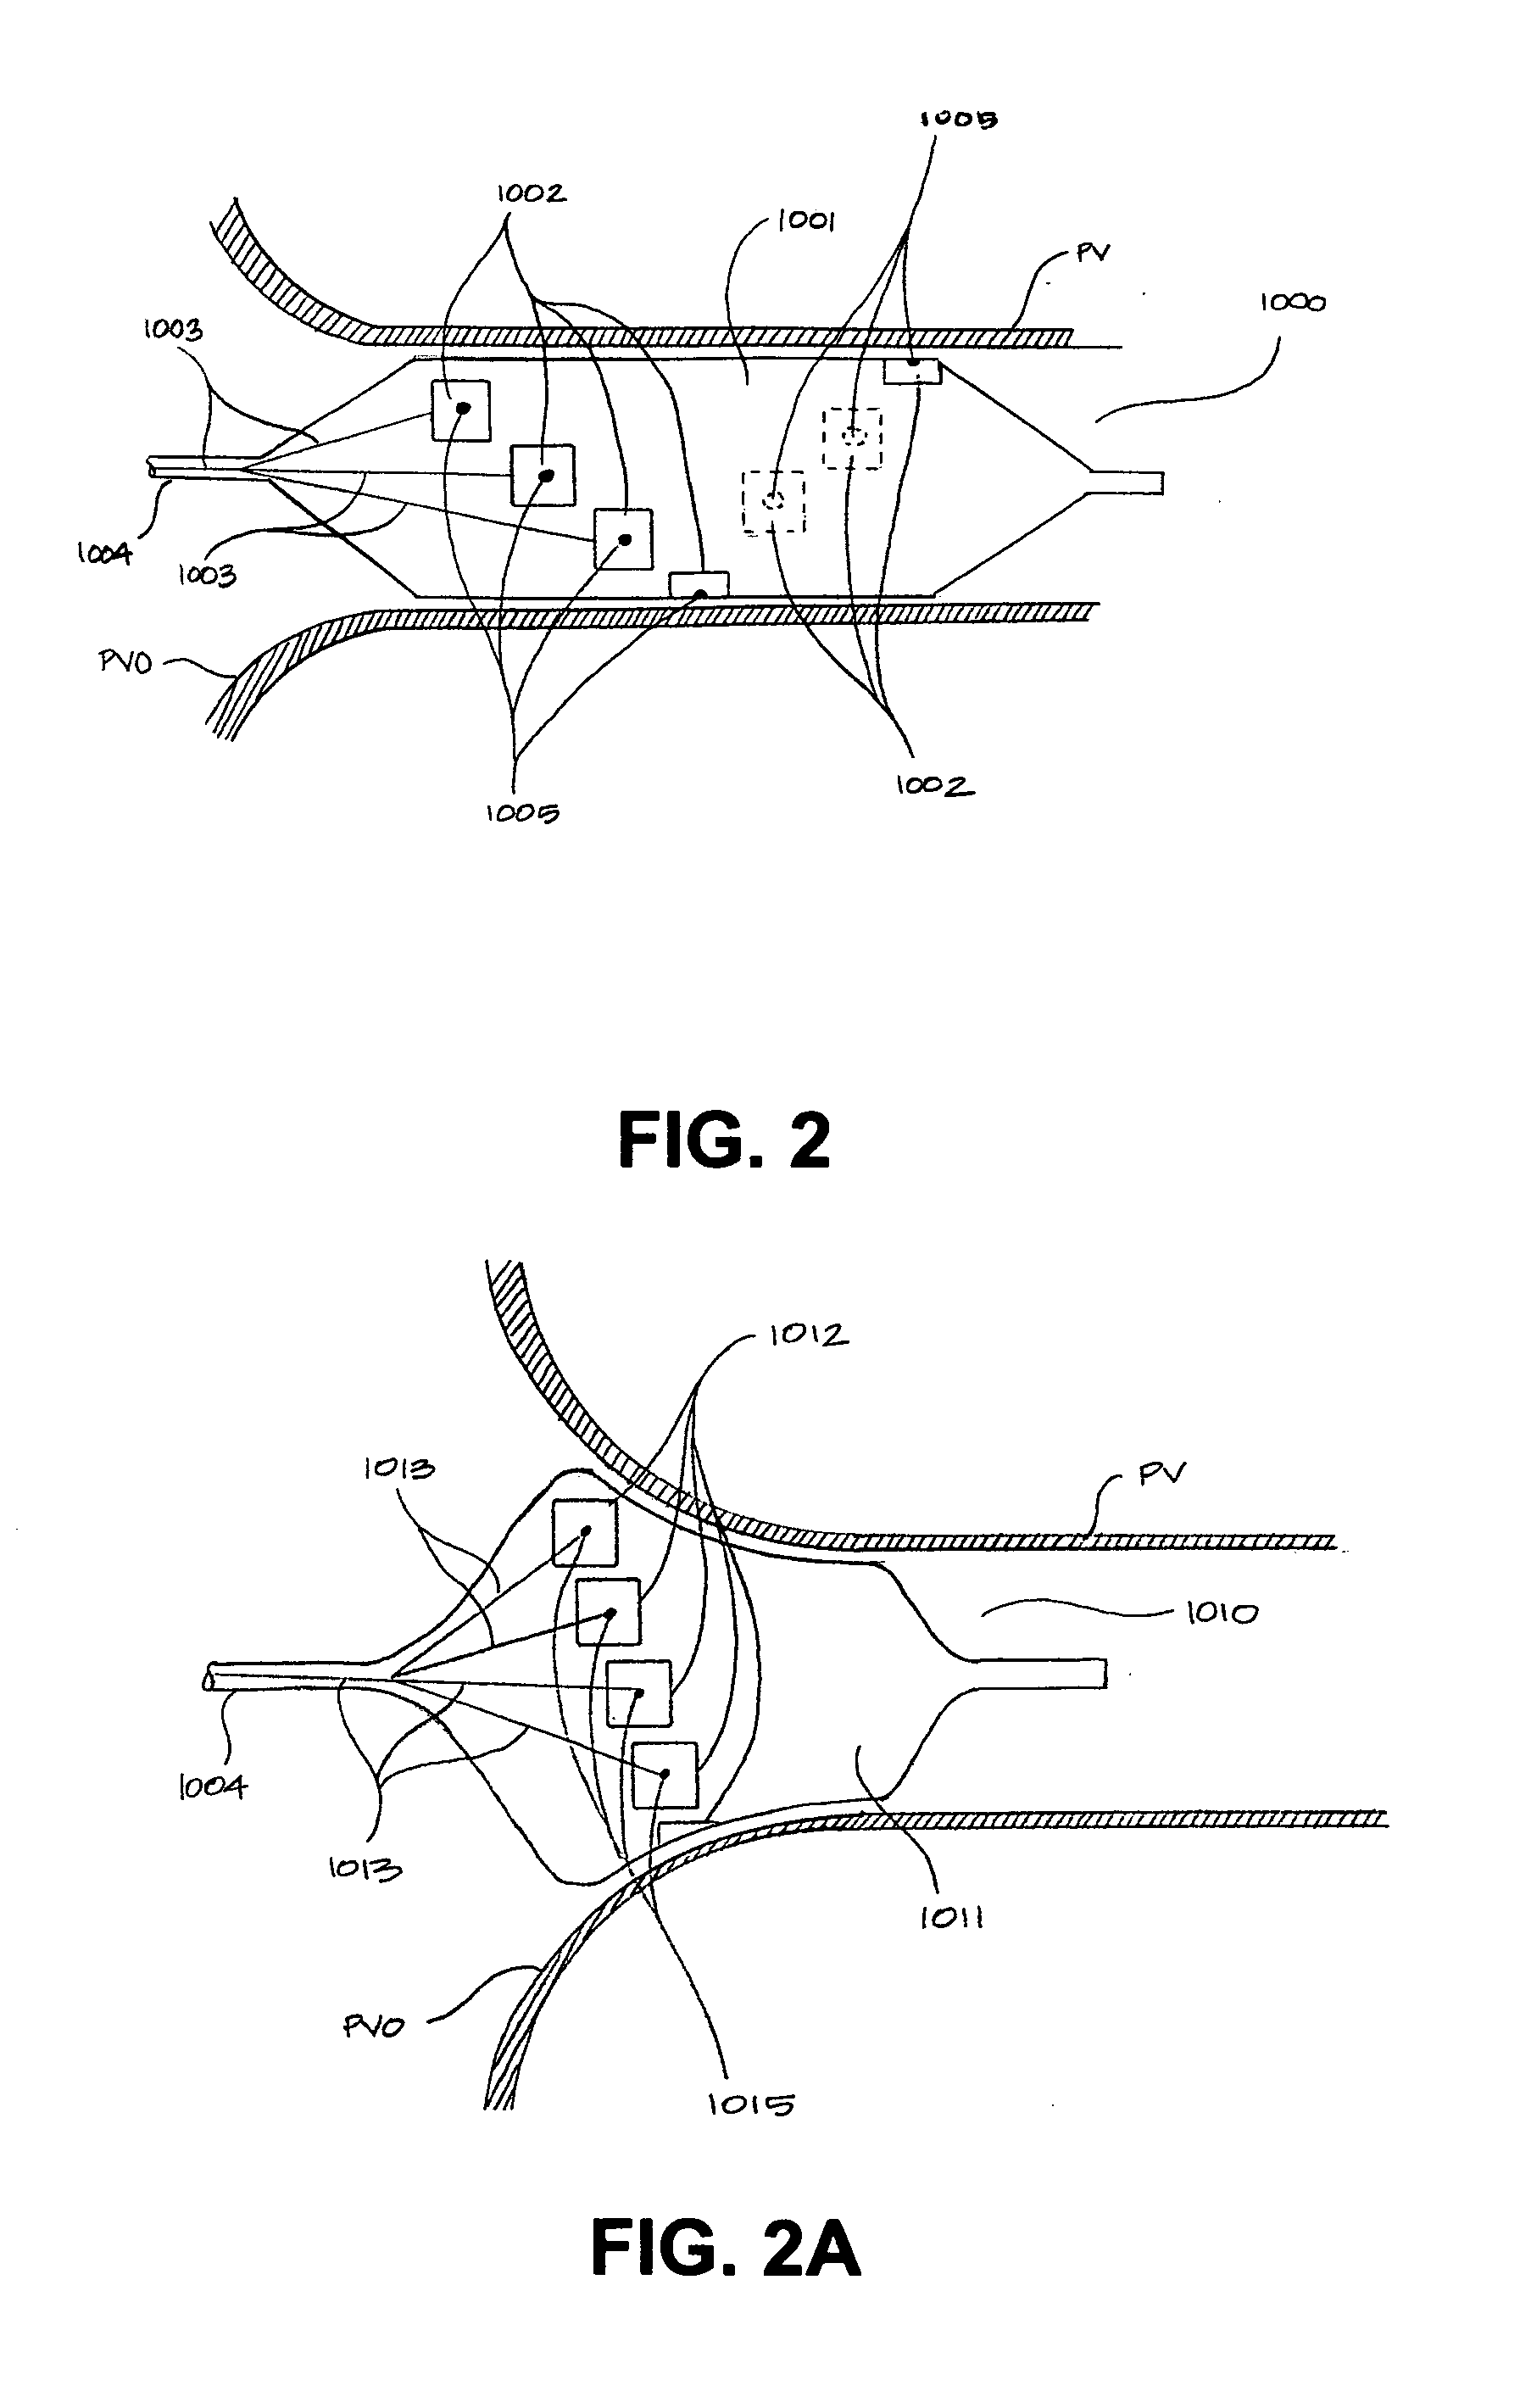 Devices and methods for denervation of the nerves surrounding the pulmonary veins for treatment of atrial fibrillation